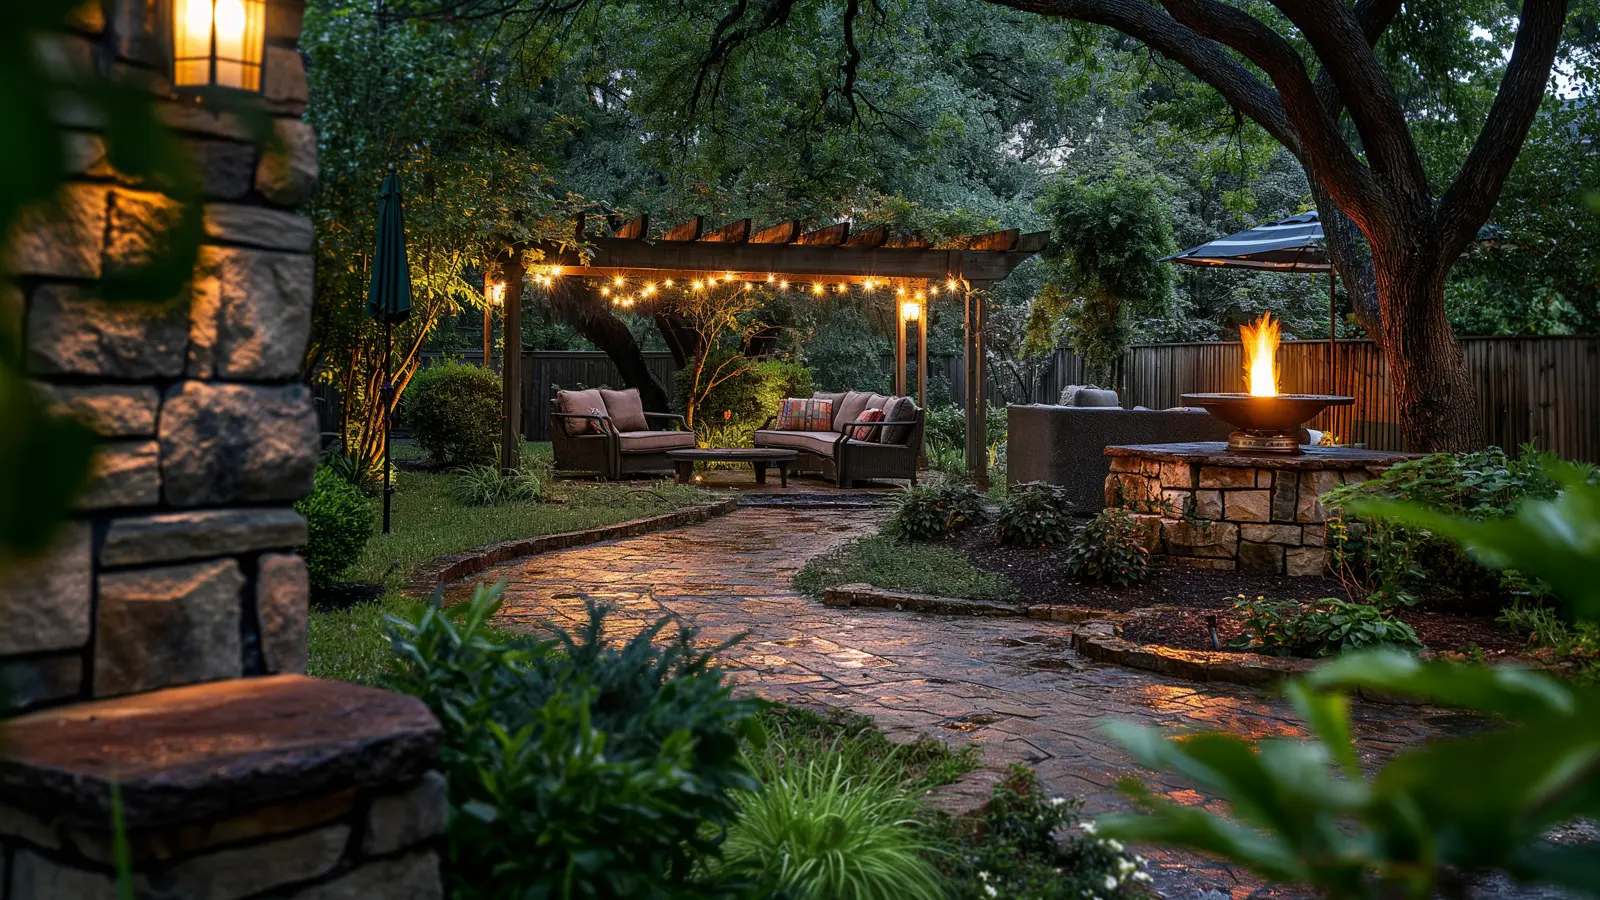 Inspiration for Functional and Beautiful Outdoor Spaces Ideas